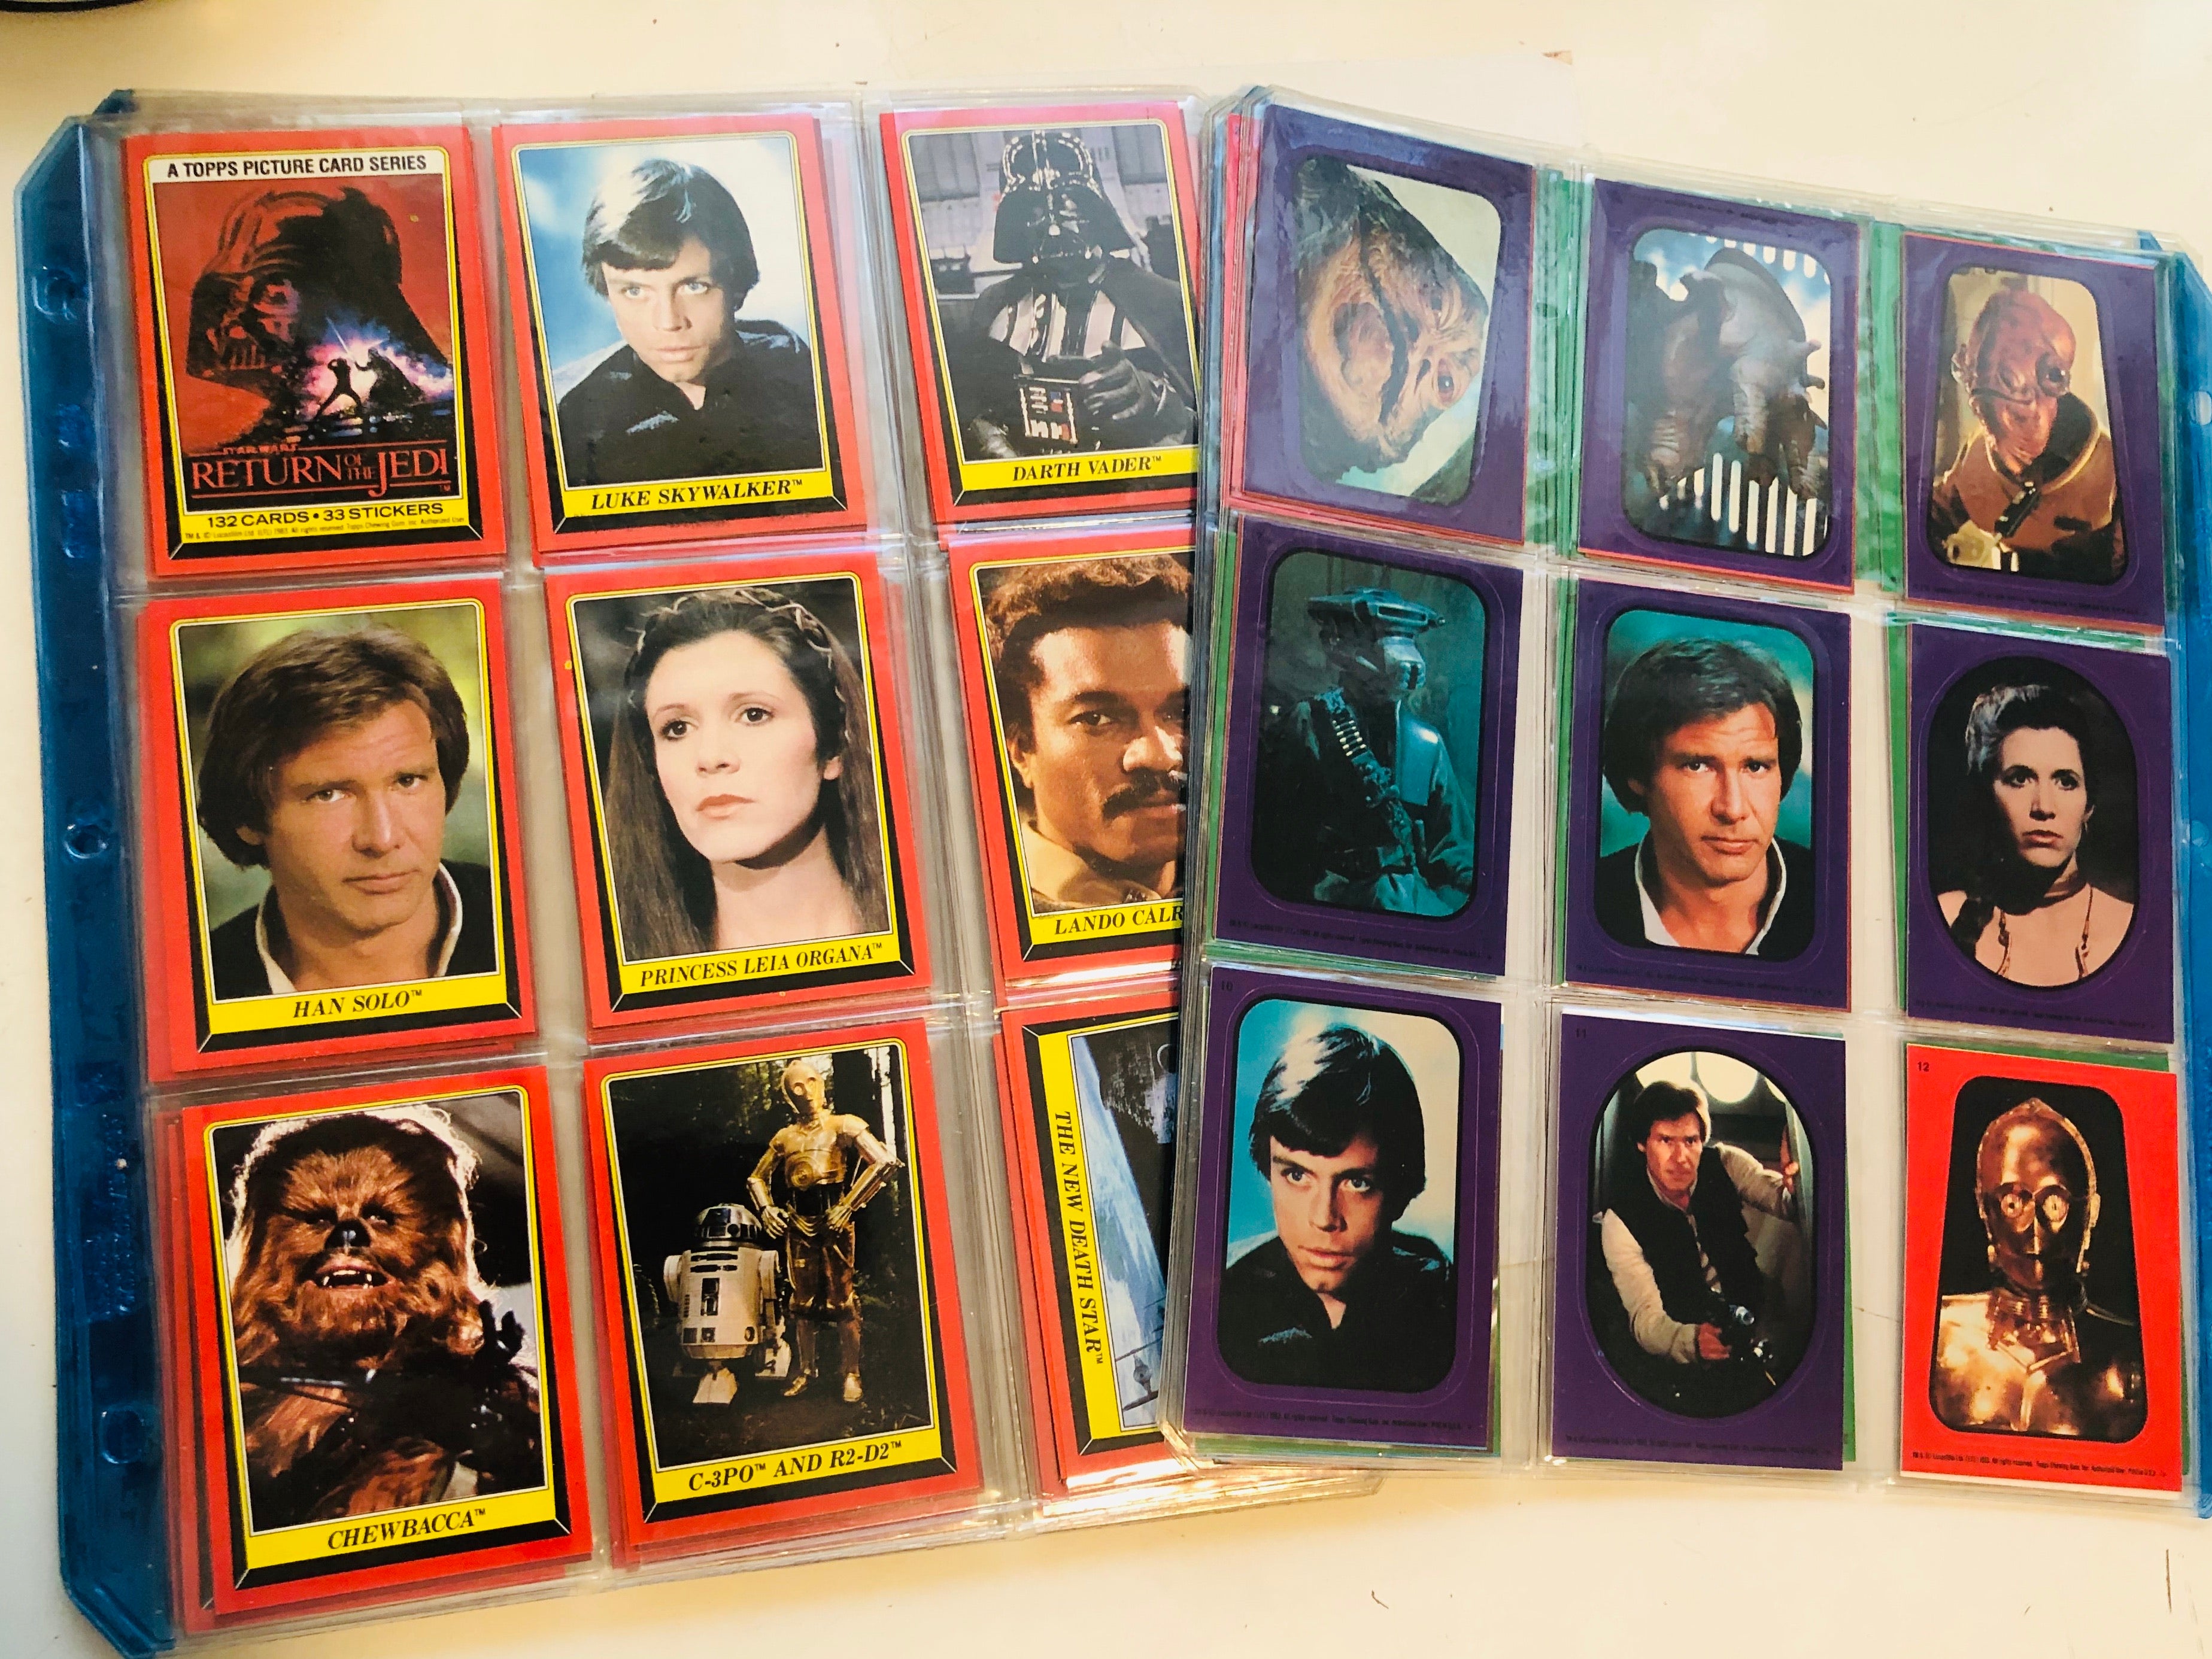 Star Wars Return of the Jedi cards series 1 and stickers set 1983